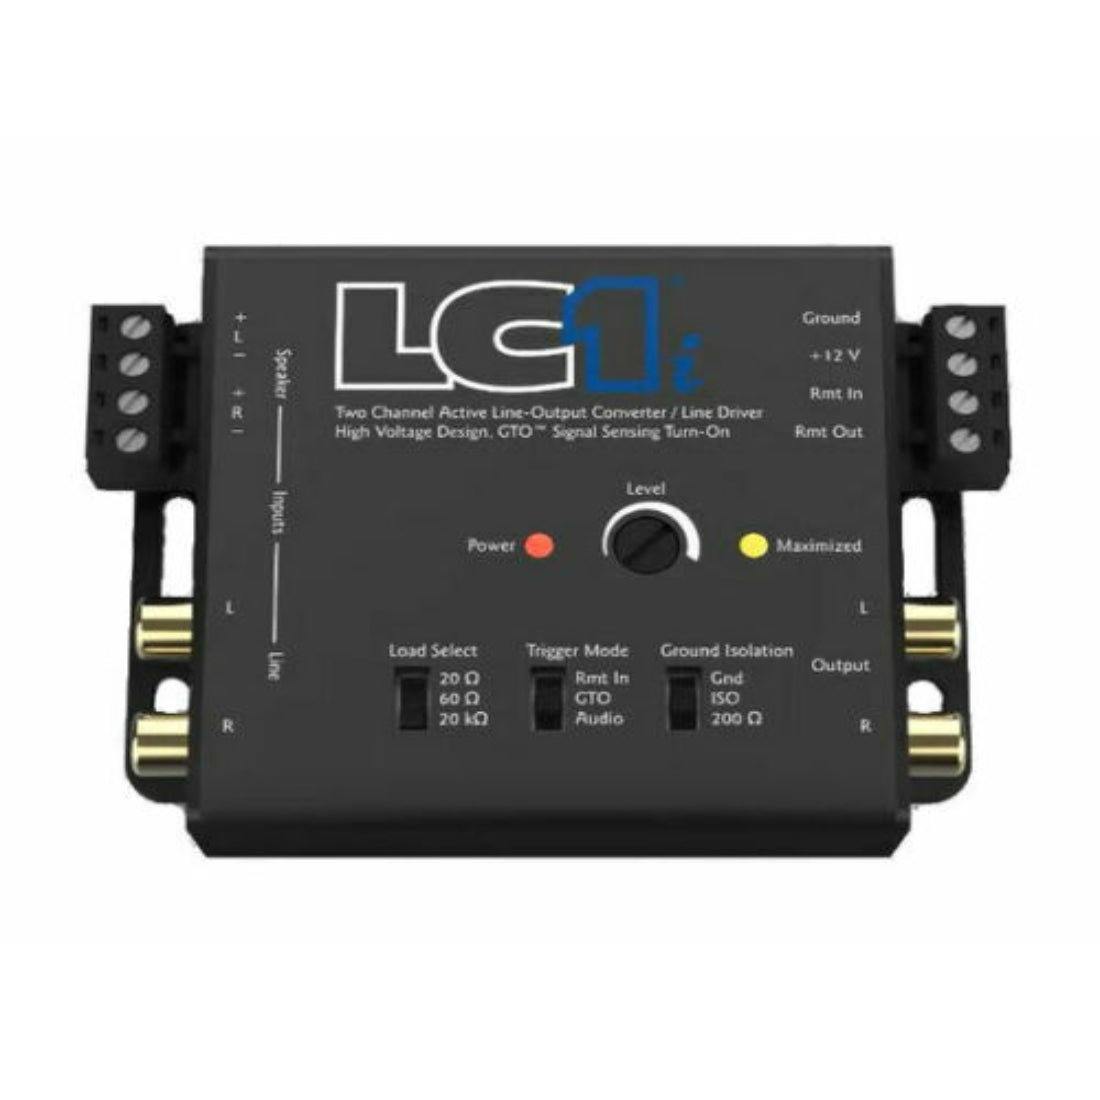 Audio Control LC1i Adjustable 400Watts GTO Signal 2 Channel Line Output Converter